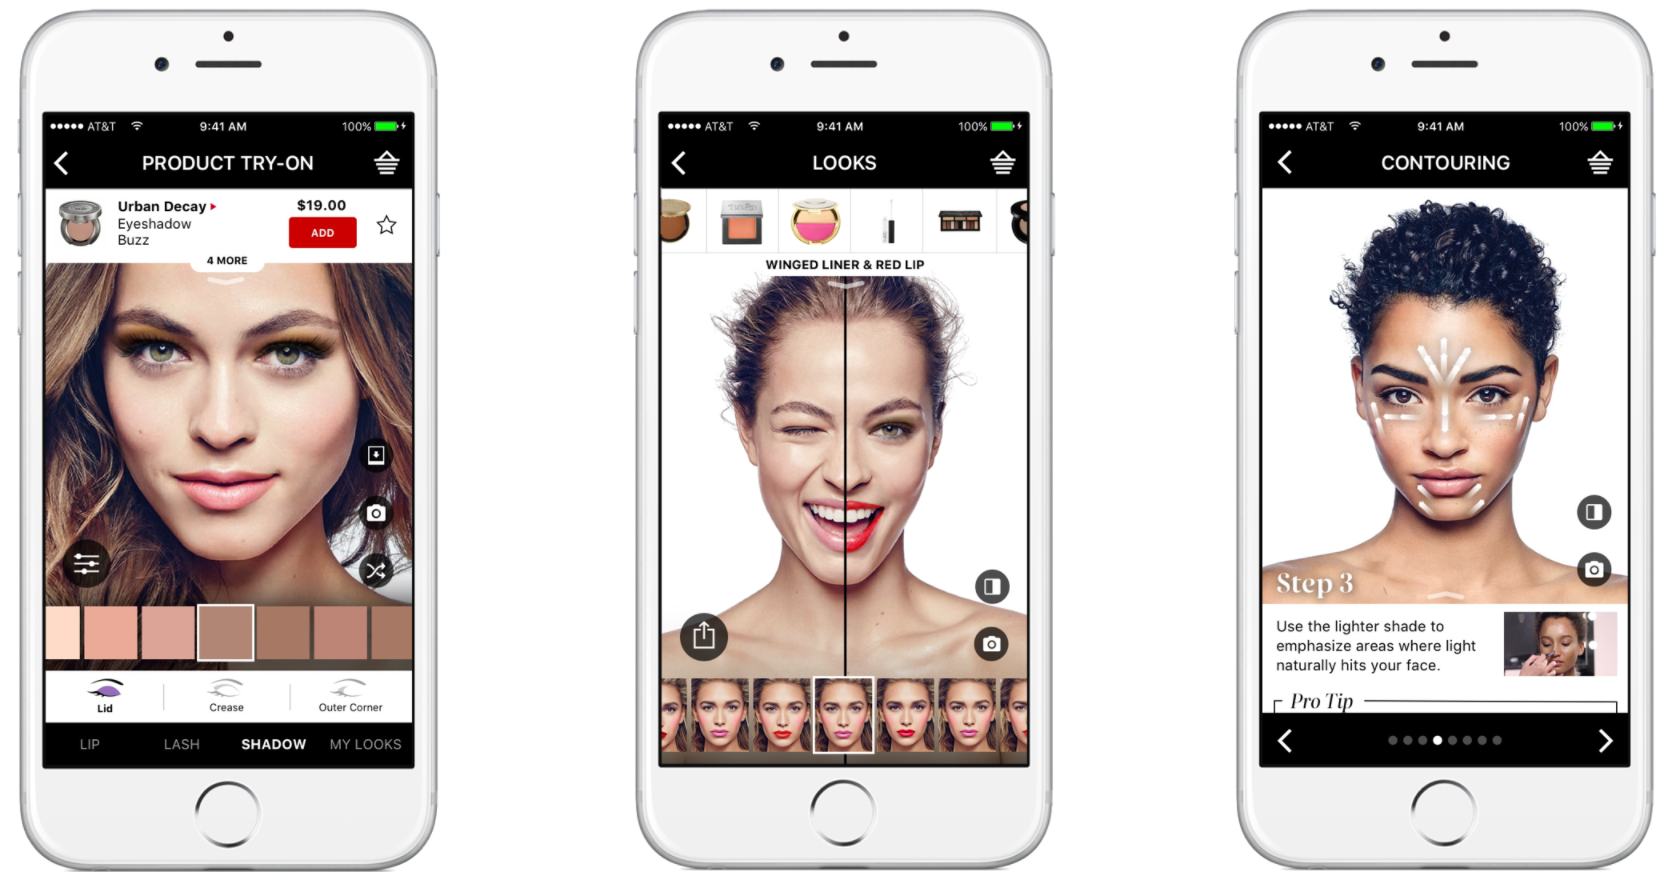 Sephora's AR App Update You Try Virtual Makeup On Home - VRScout